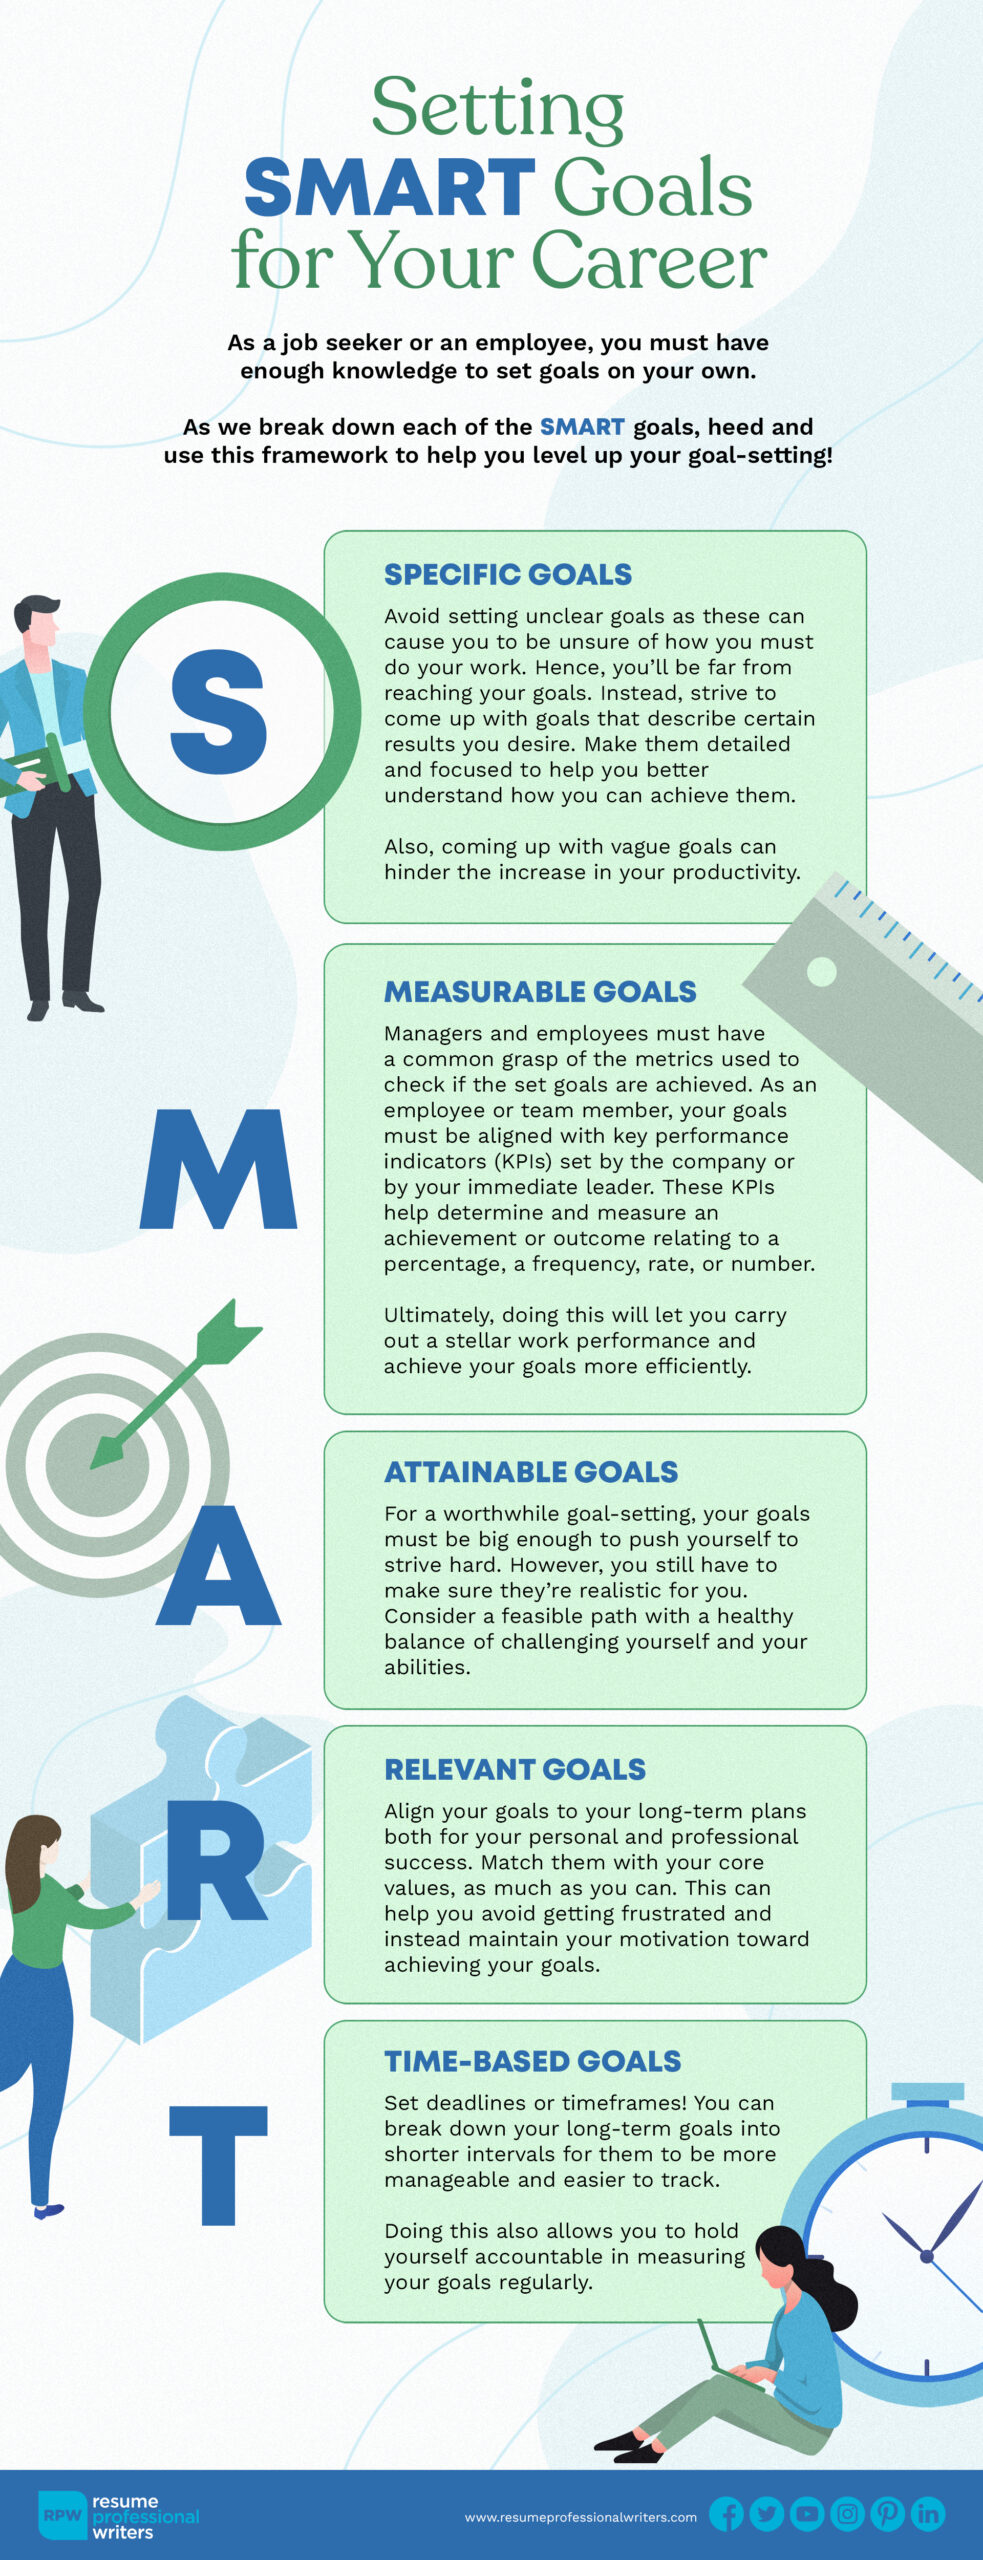 examples-of-personal-smart-goals